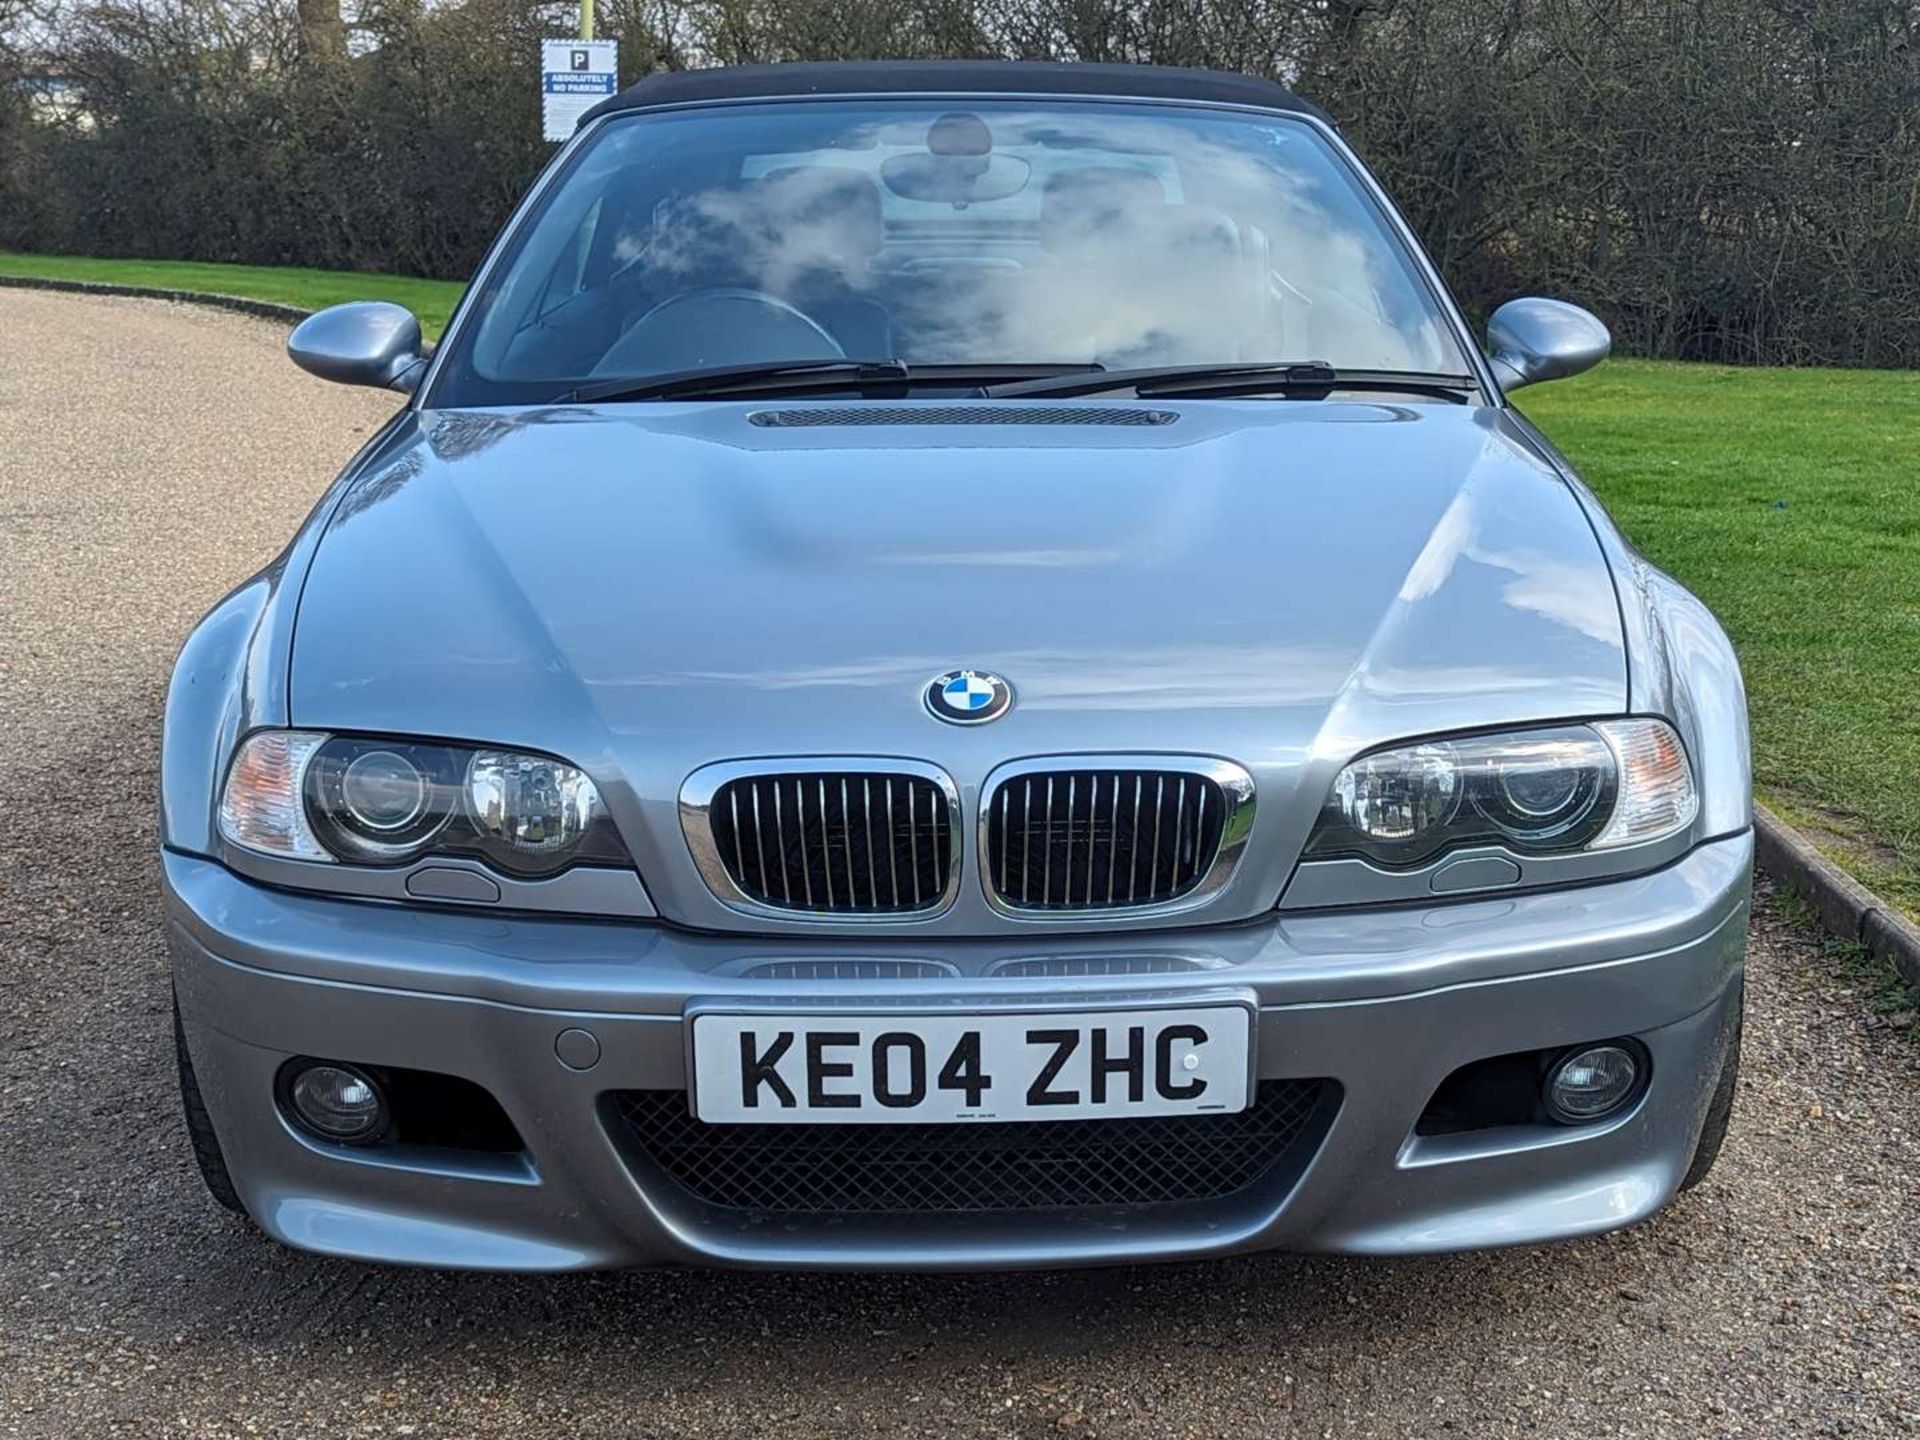 2004 BMW M3 CONVERTIBLE - Image 3 of 29